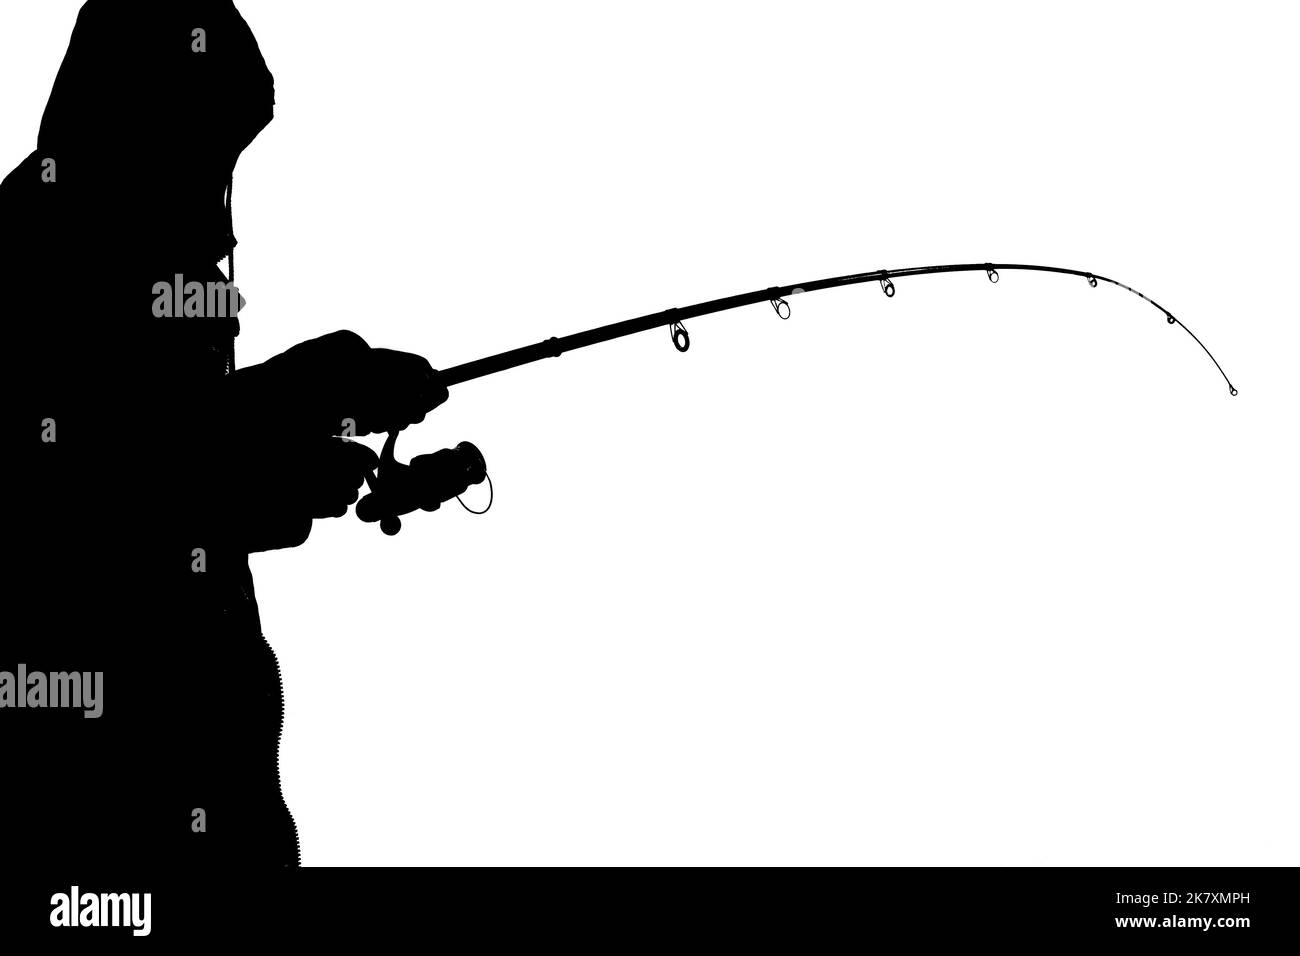 Fishing equipment cut out Black and White Stock Photos & Images - Alamy